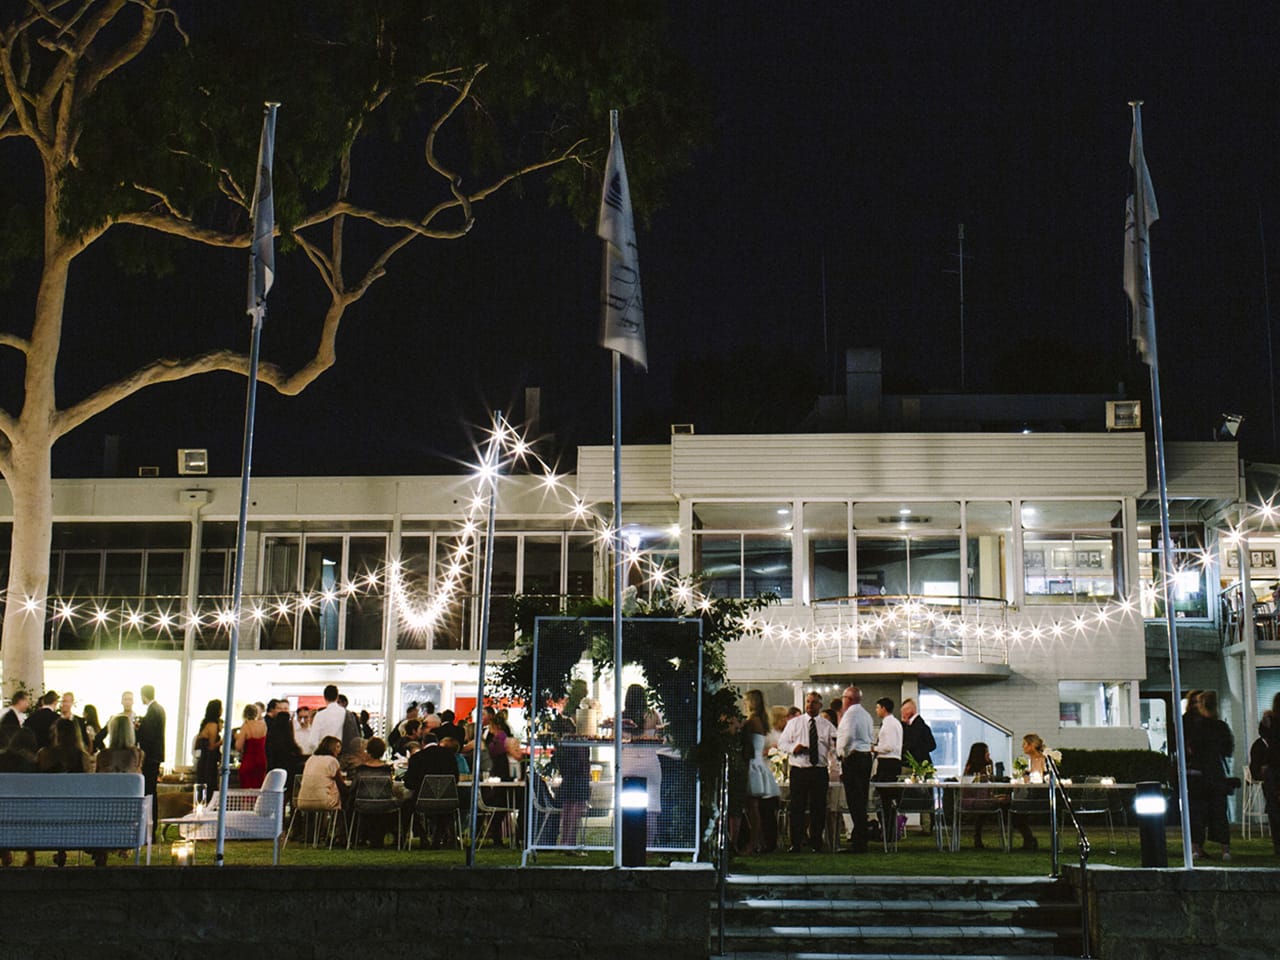 People Gathering Outside The Function Area Under A Tree With Tables, Chairs, String Lights And Flag Poles